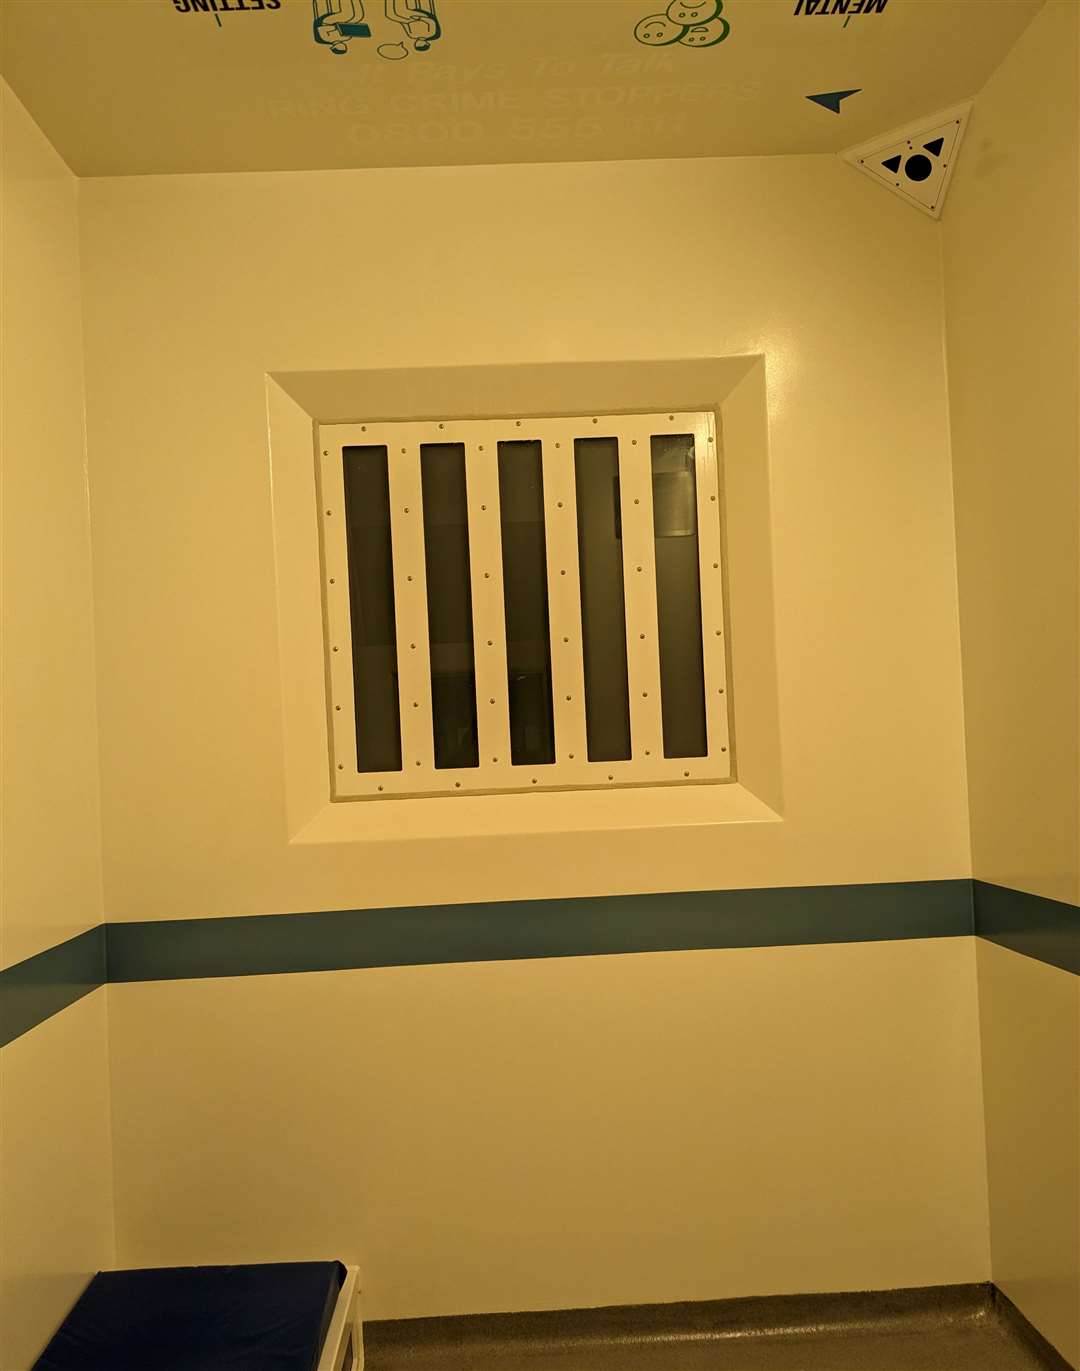 I got to experience what it felt like to spend time in a cell. Picture: Suzanne Day